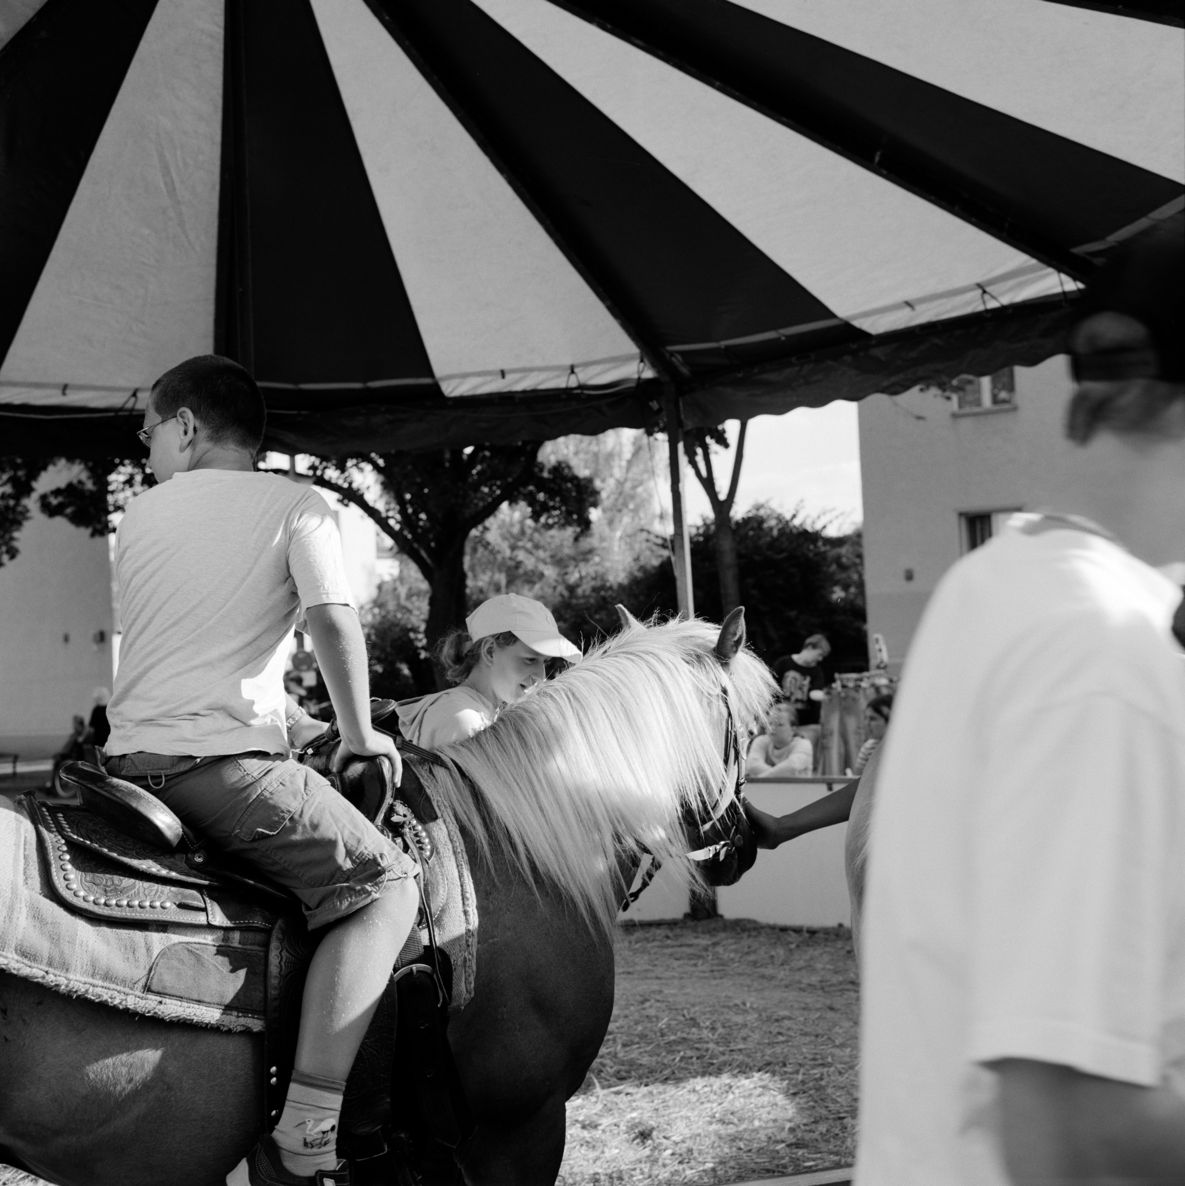 Black and white photograph: Side view of a boy on a horse under a striped canopy. Other people can be seen in the background.